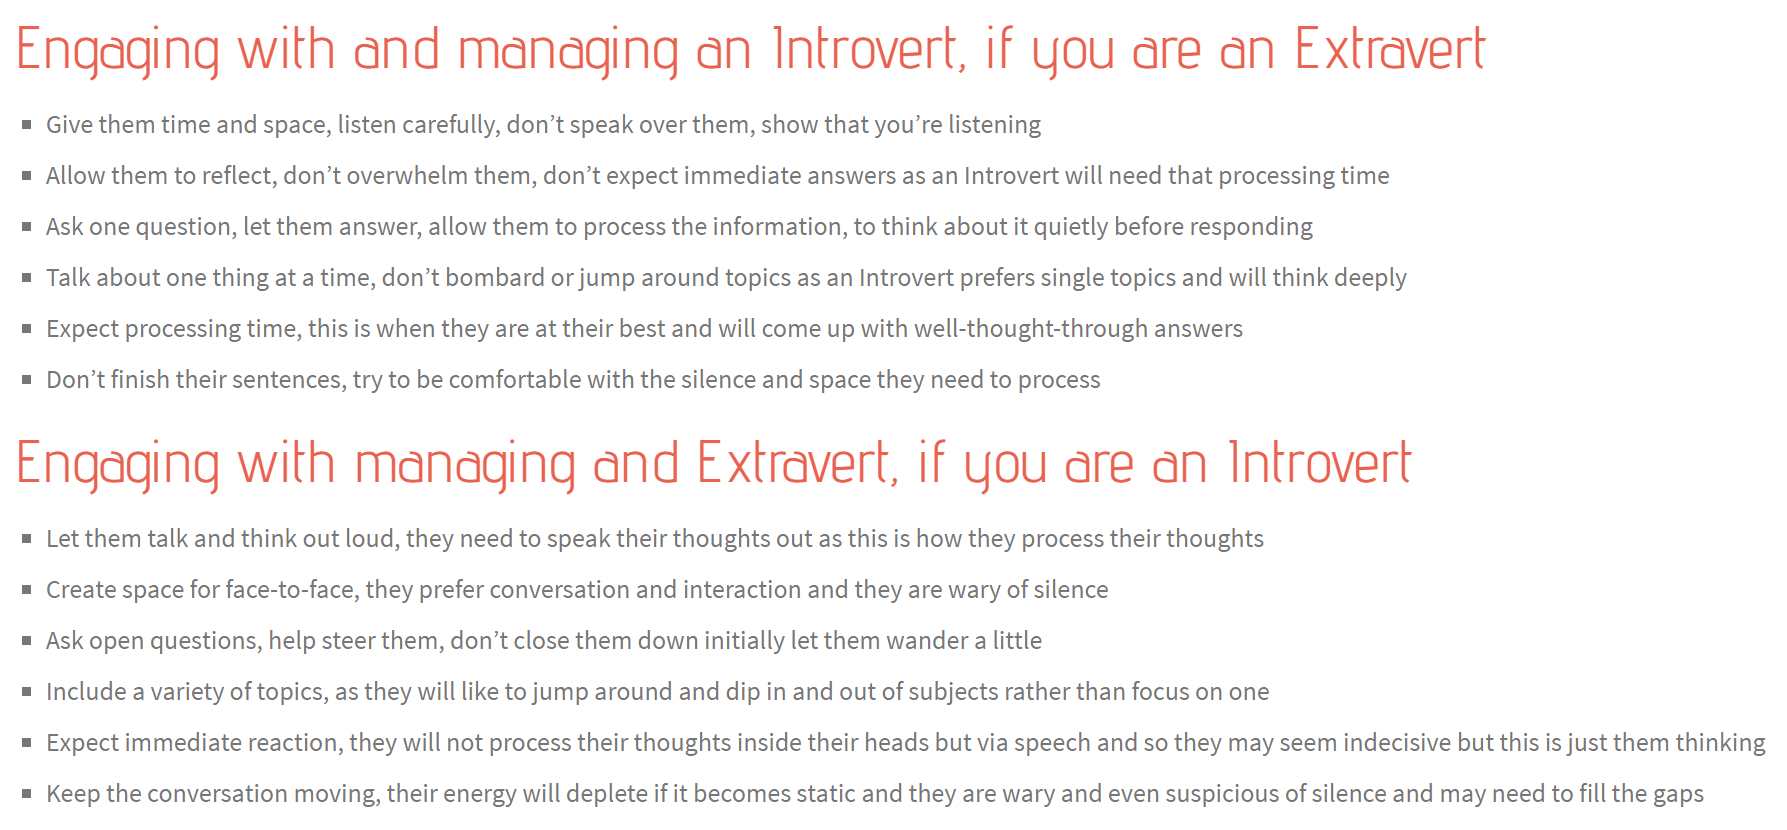 guides:extraverts_vs_introverts_engagement.png